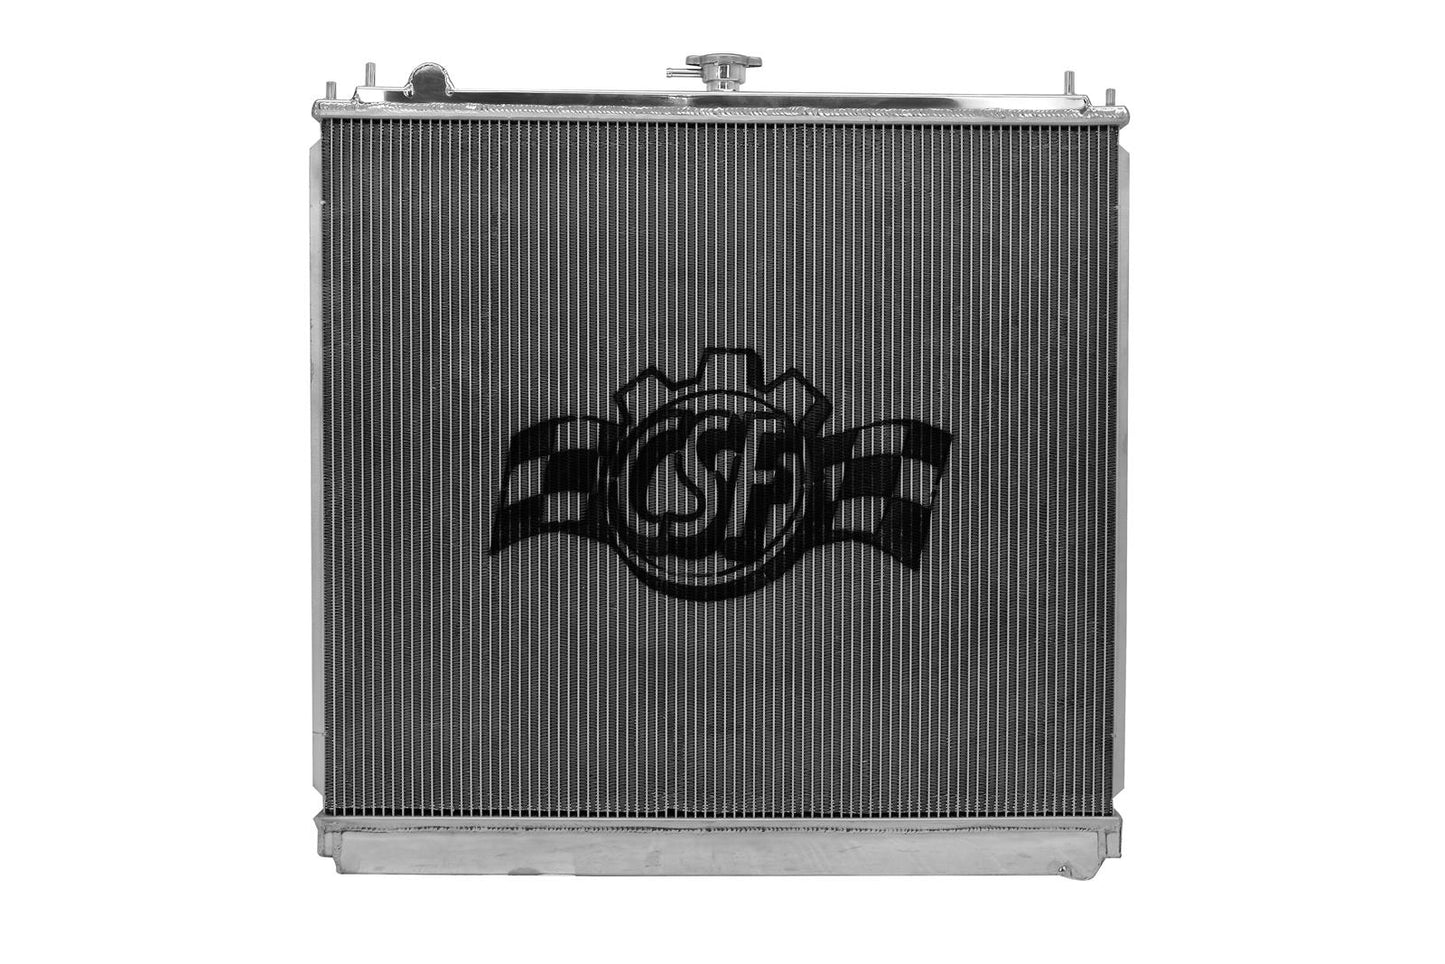 CSF Race Radiator for 05-15 Nissan Frontier, 05-12 Nissan Pathfinder, 05-15 Nissan Xterra (All Automatic & Manual)